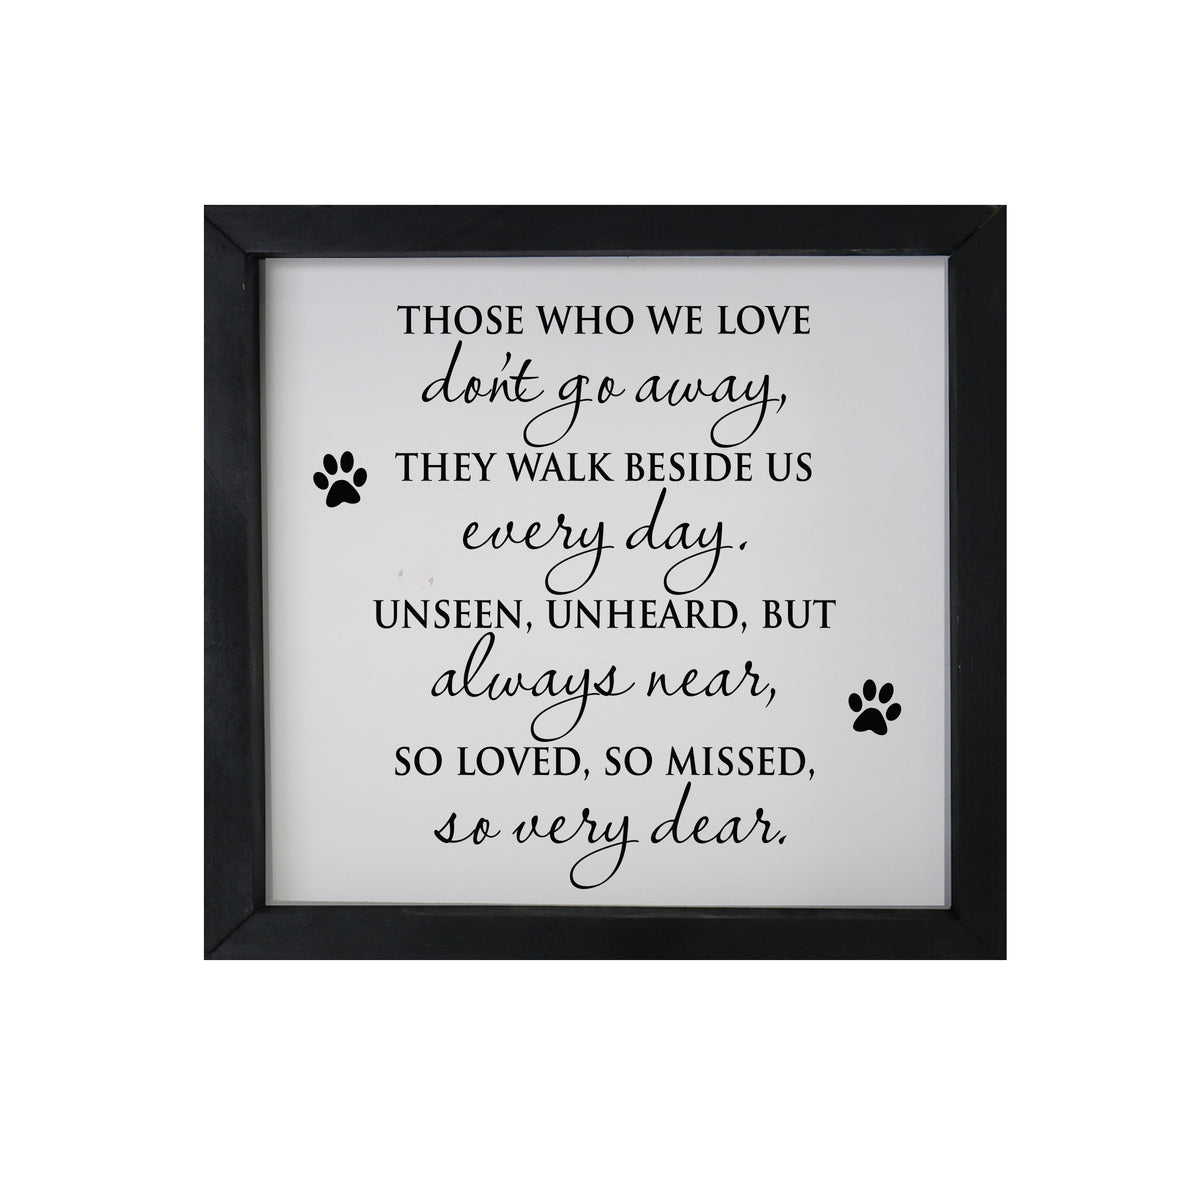 11.5x11.5 Black Framed Pet Memorial Shadow Box with phrase &quot;Those Who We Love Don&#39;t Go Away&quot;